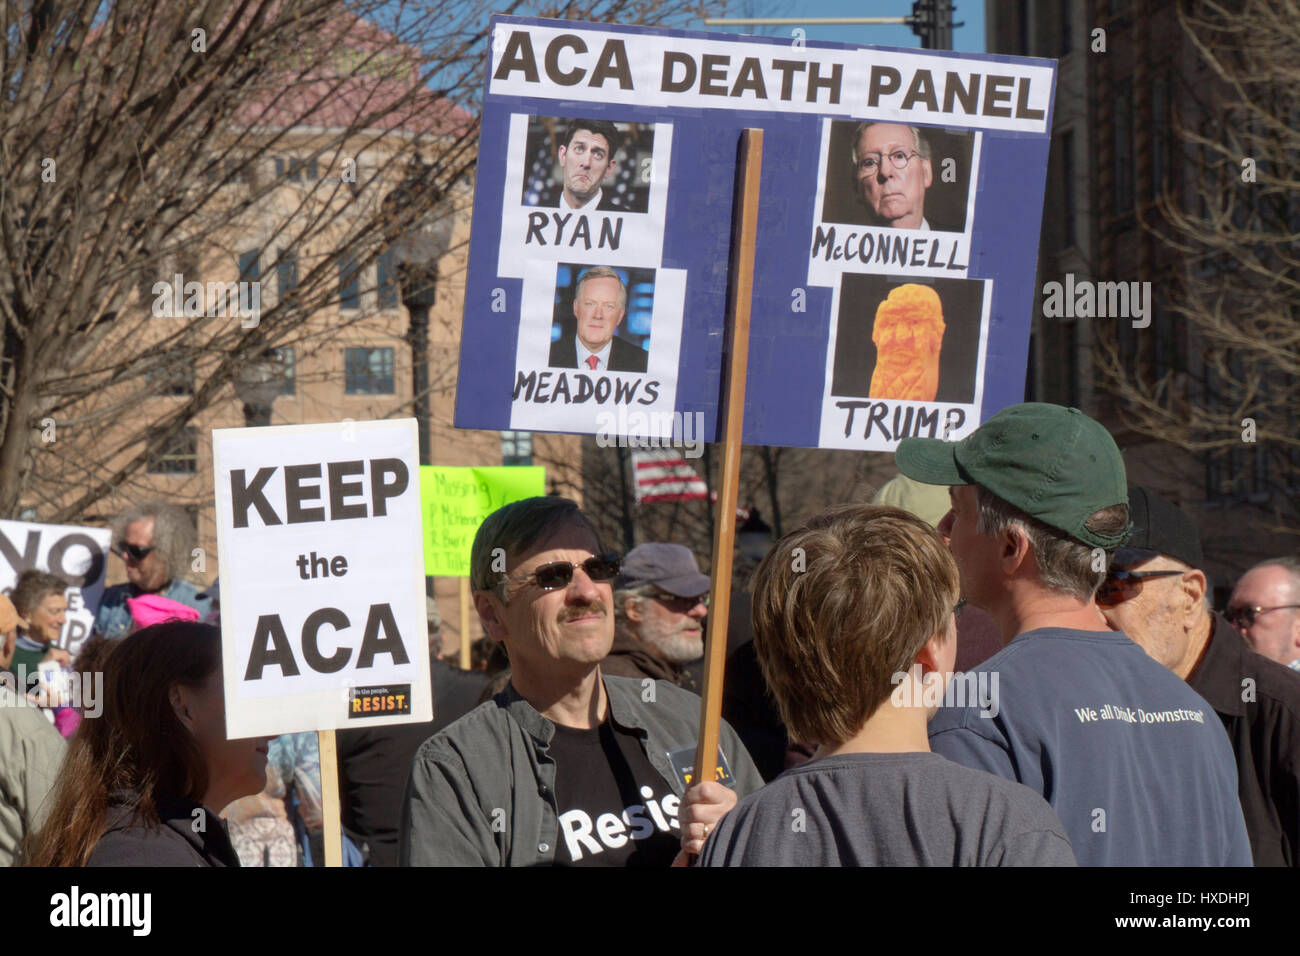 Asheville, North Carolina, USA - February 25, 2017: Activists hold Affordable Care Act (ACA) signs depicting Rupublicans Mark Meadows, Paul Ryan, Mitc Stock Photo